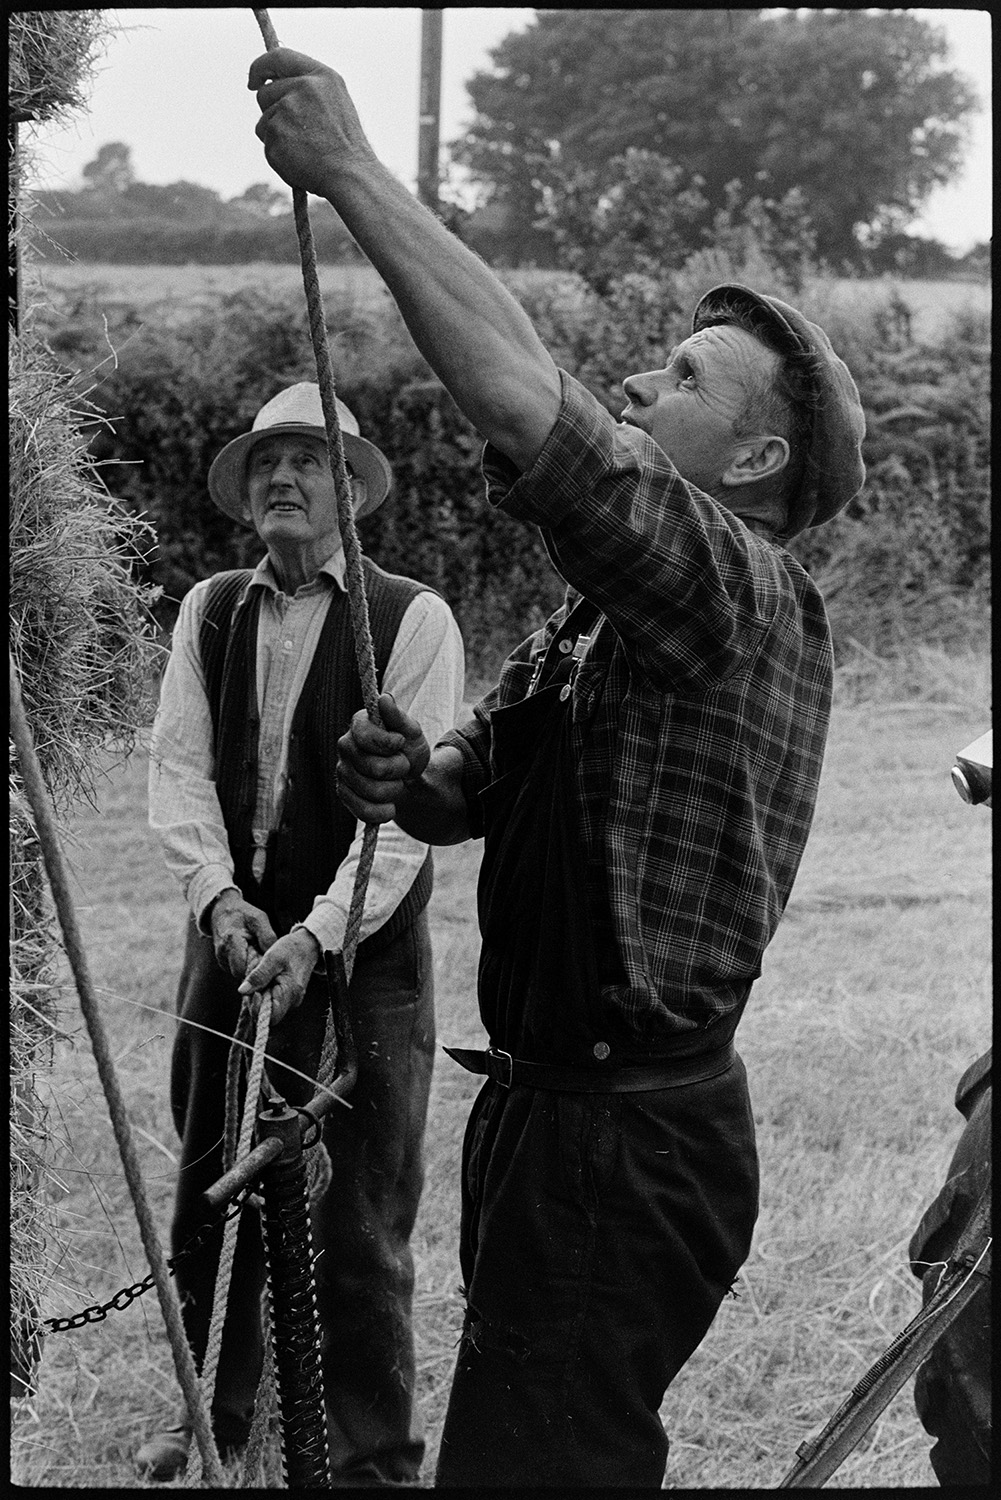 Haymaking, securing the load. 
[Mr Oke, in the foreground, and another man securing a load of hay bales on a trailer using ropes, in a field at Deckport, Hatherleigh.]